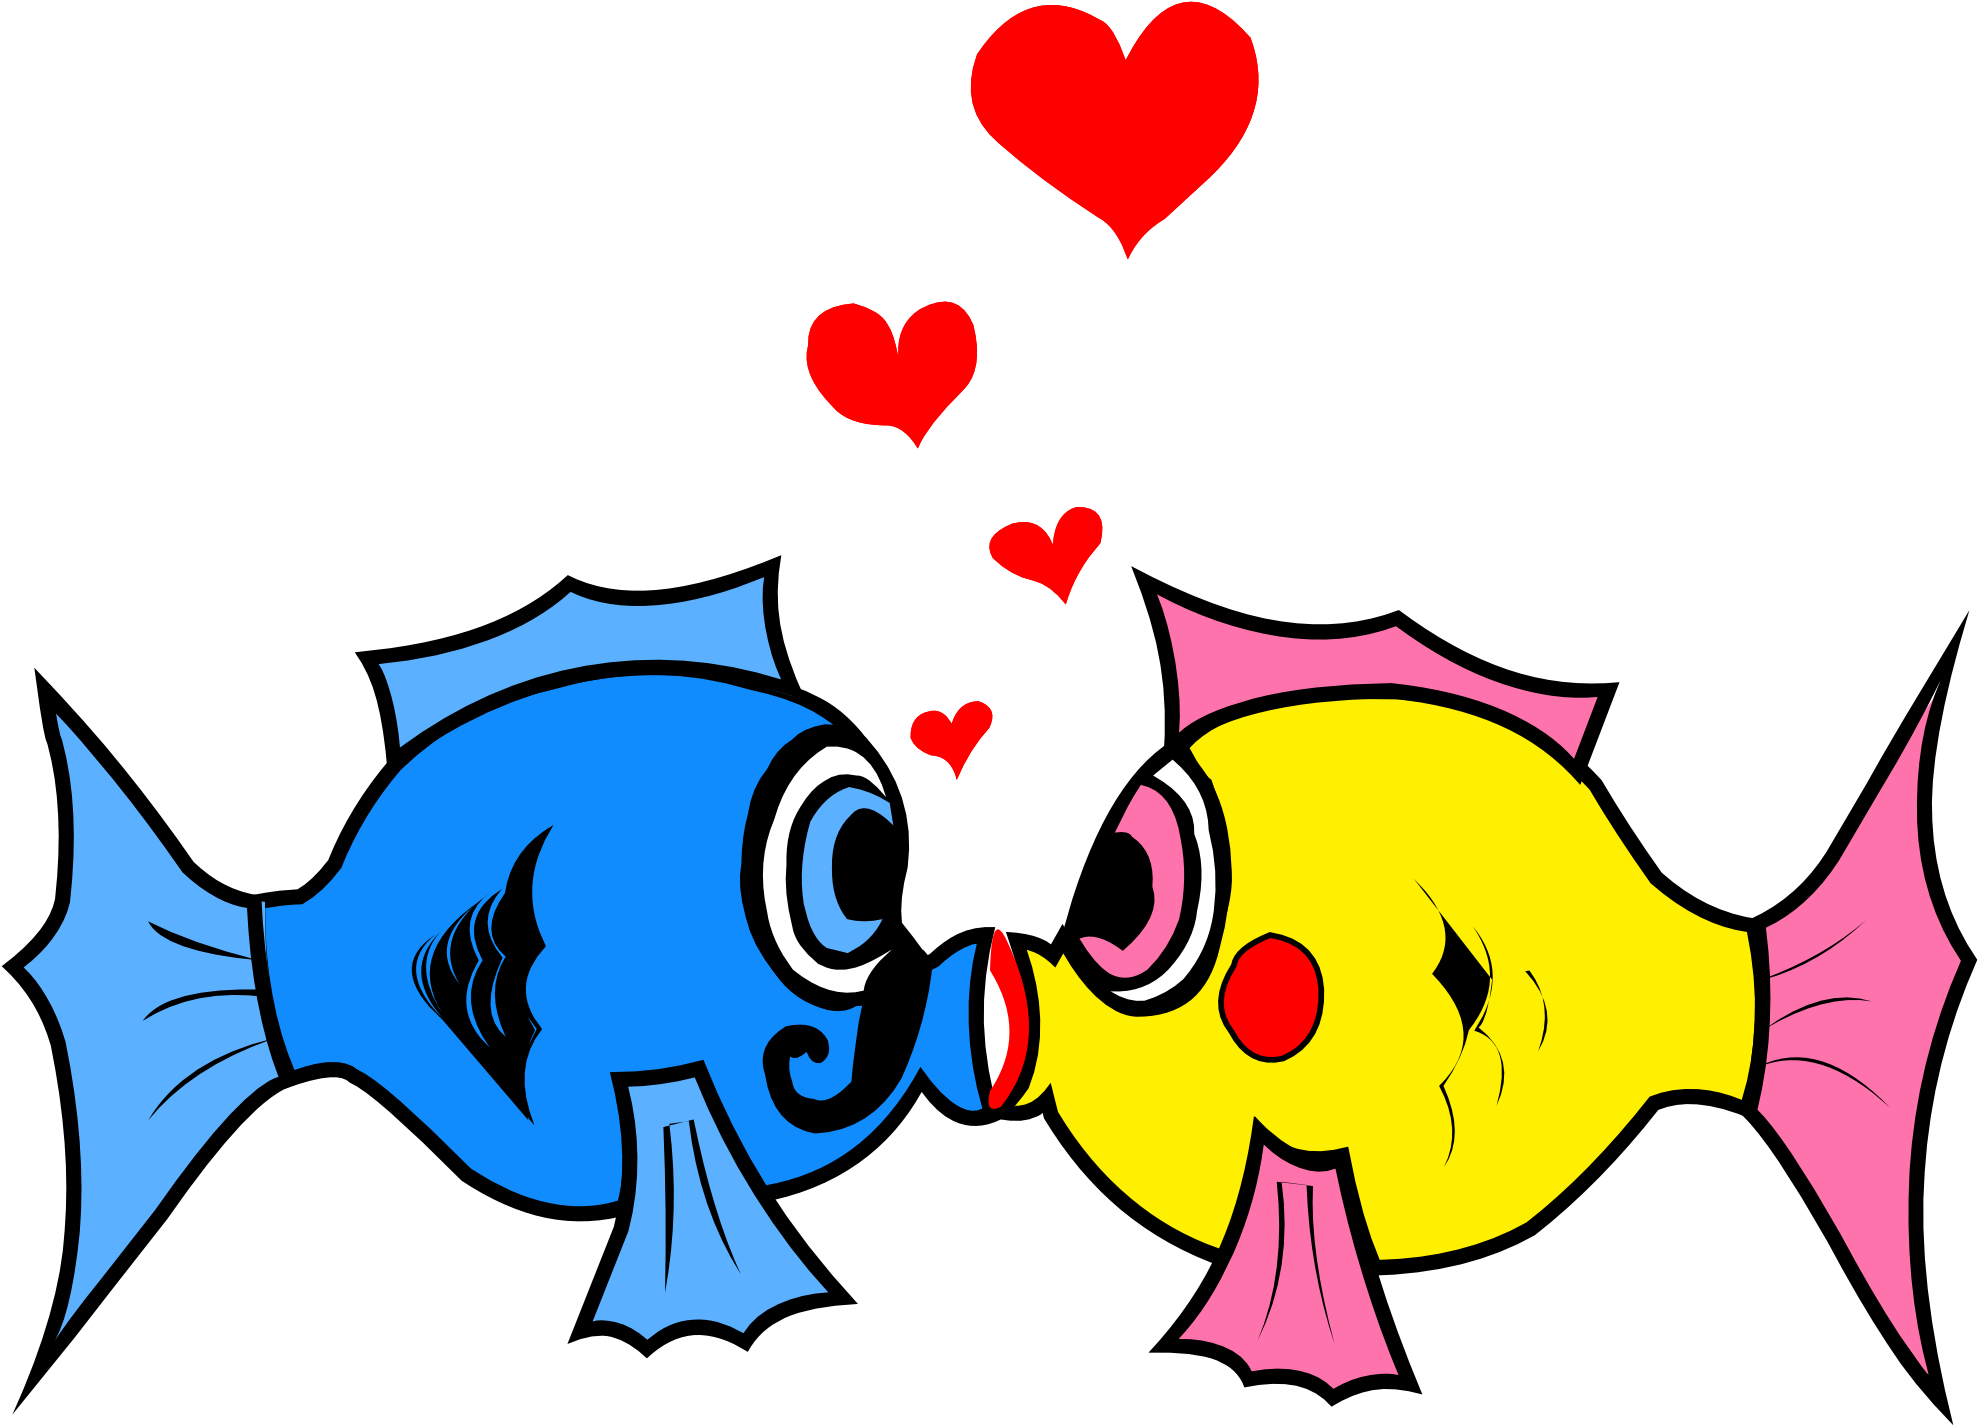 Love Clip Art Animated   Clipart Panda   Free Clipart Images